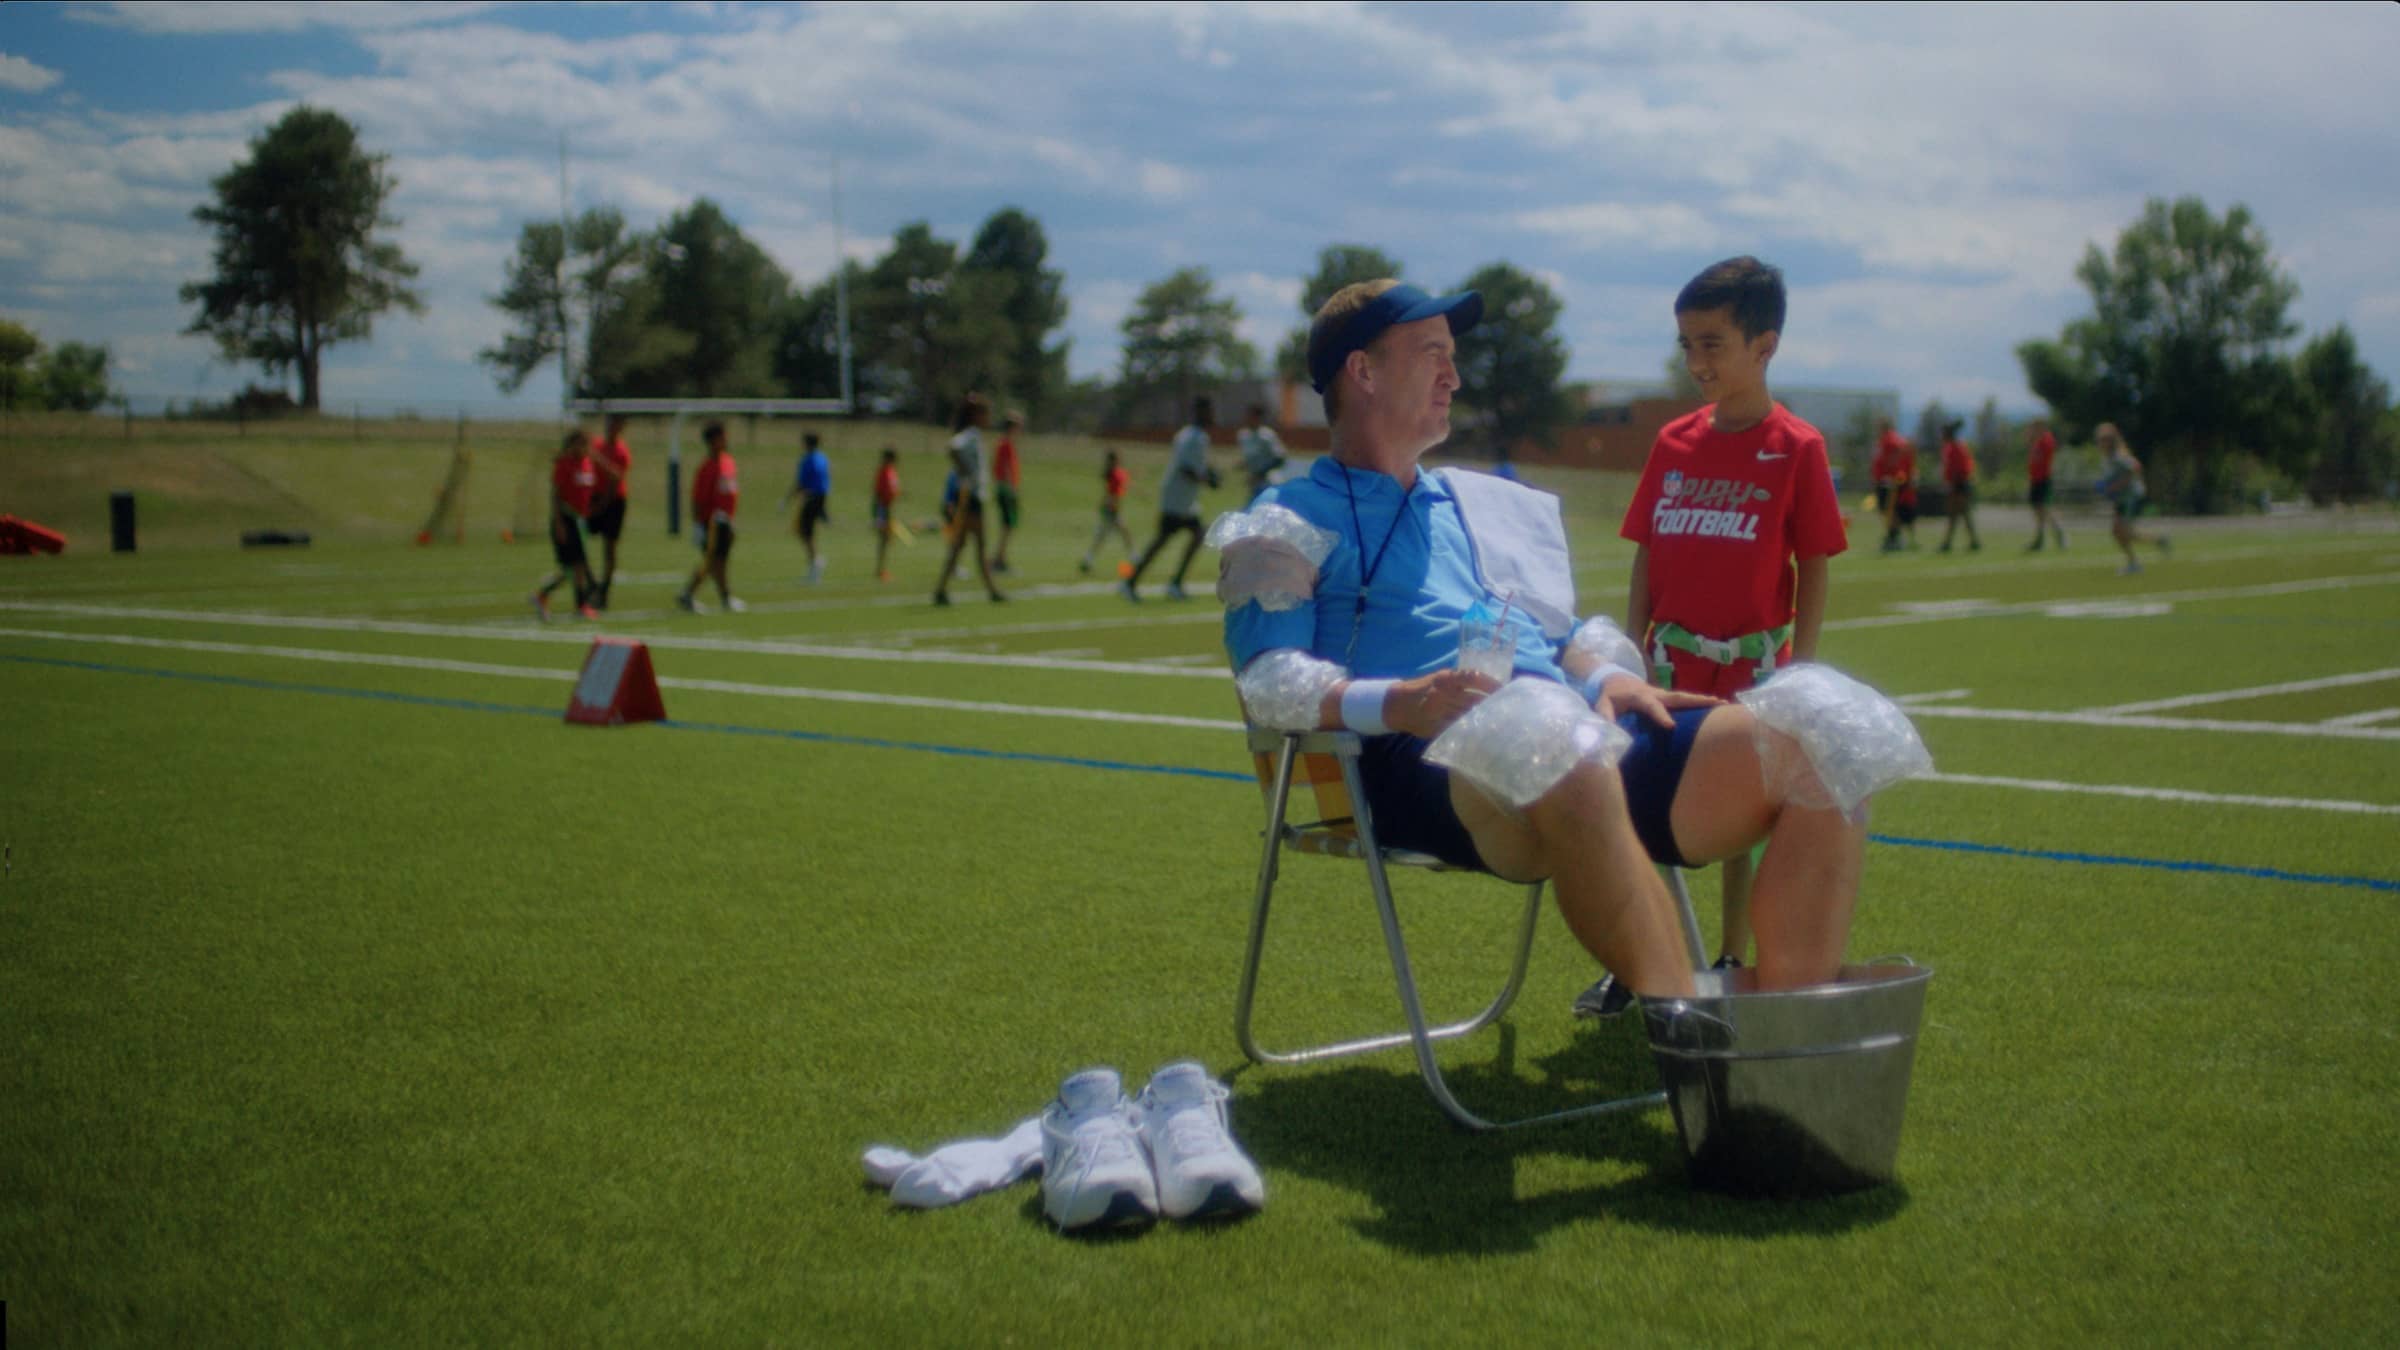 Peyton and eli manning show what next-generation football looks like in new nfl campaign for youth football